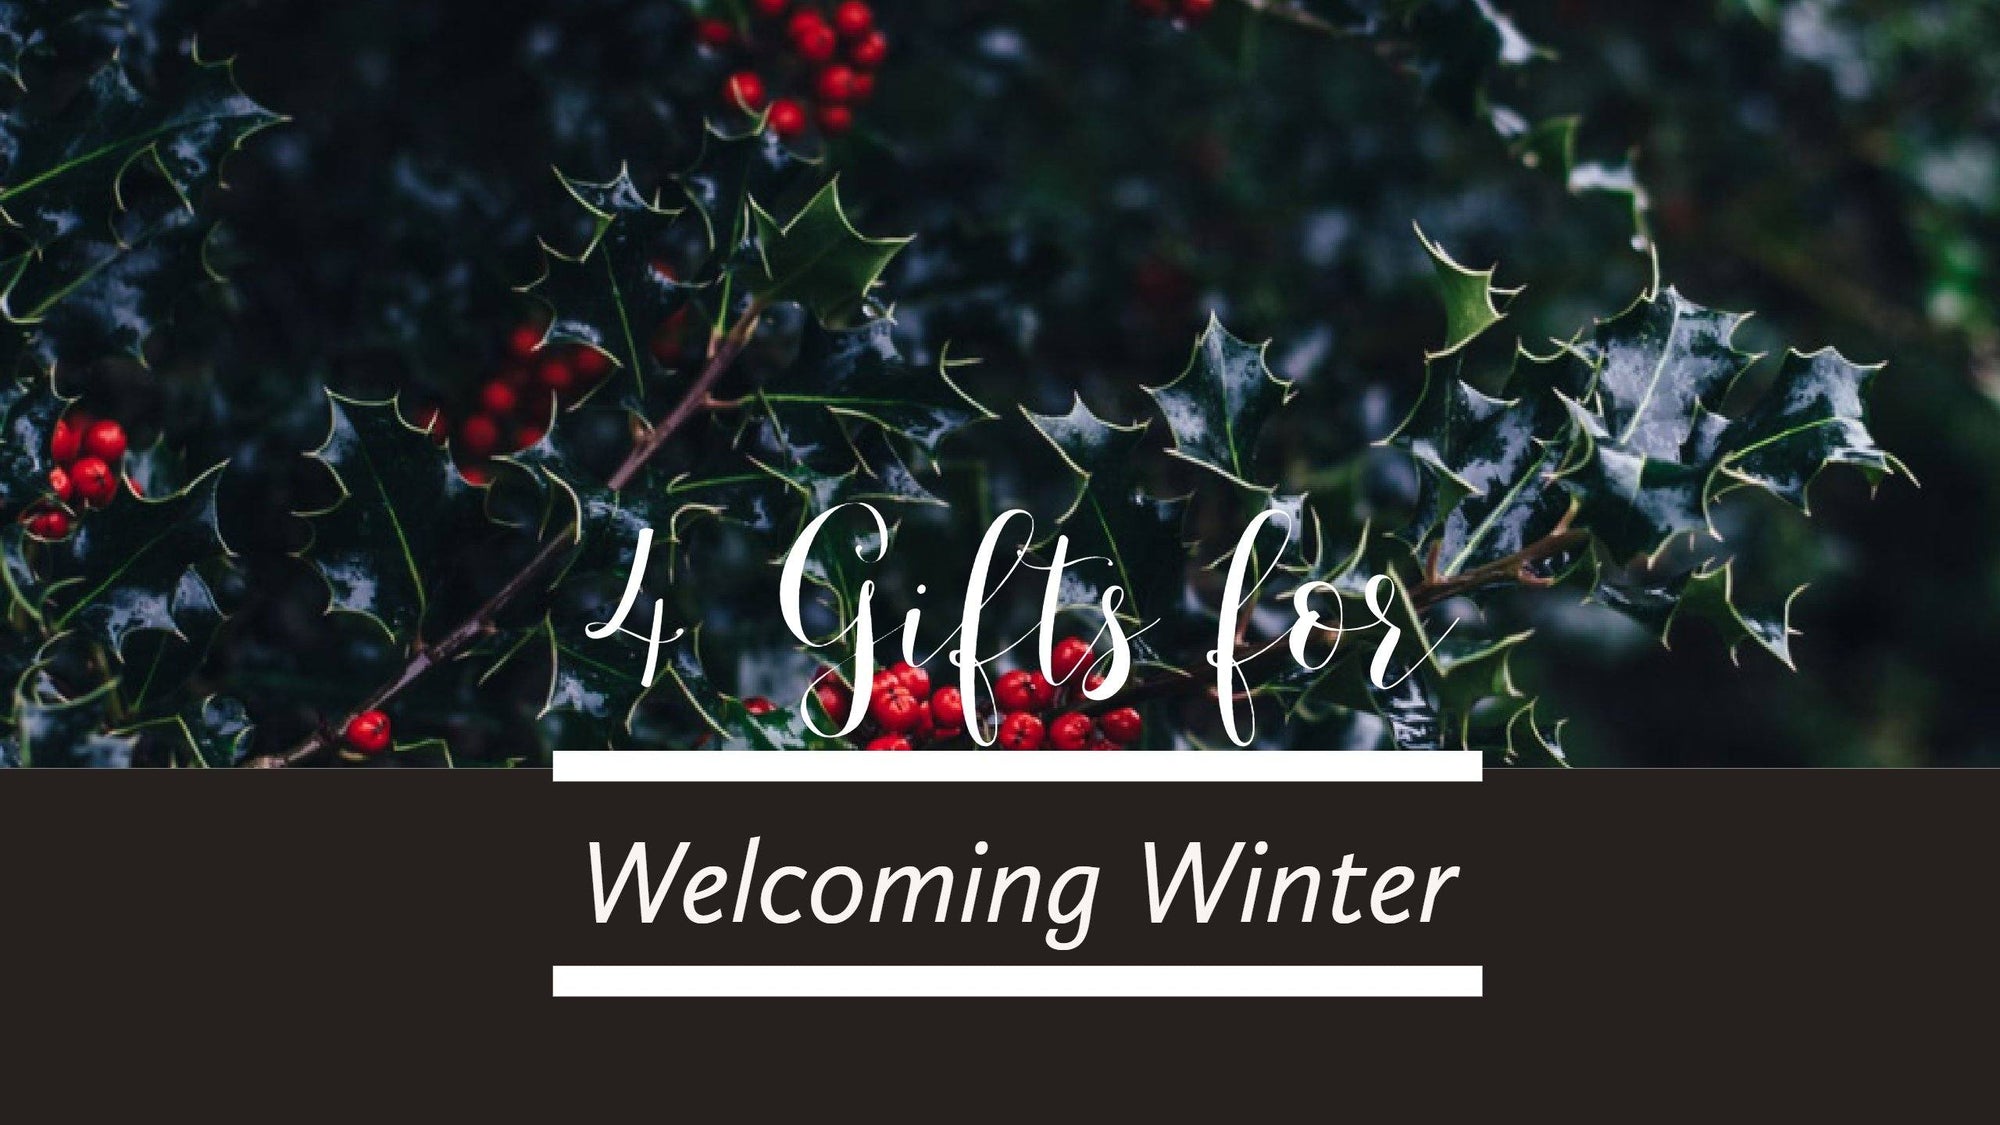 4 Gifts for Welcoming Winter